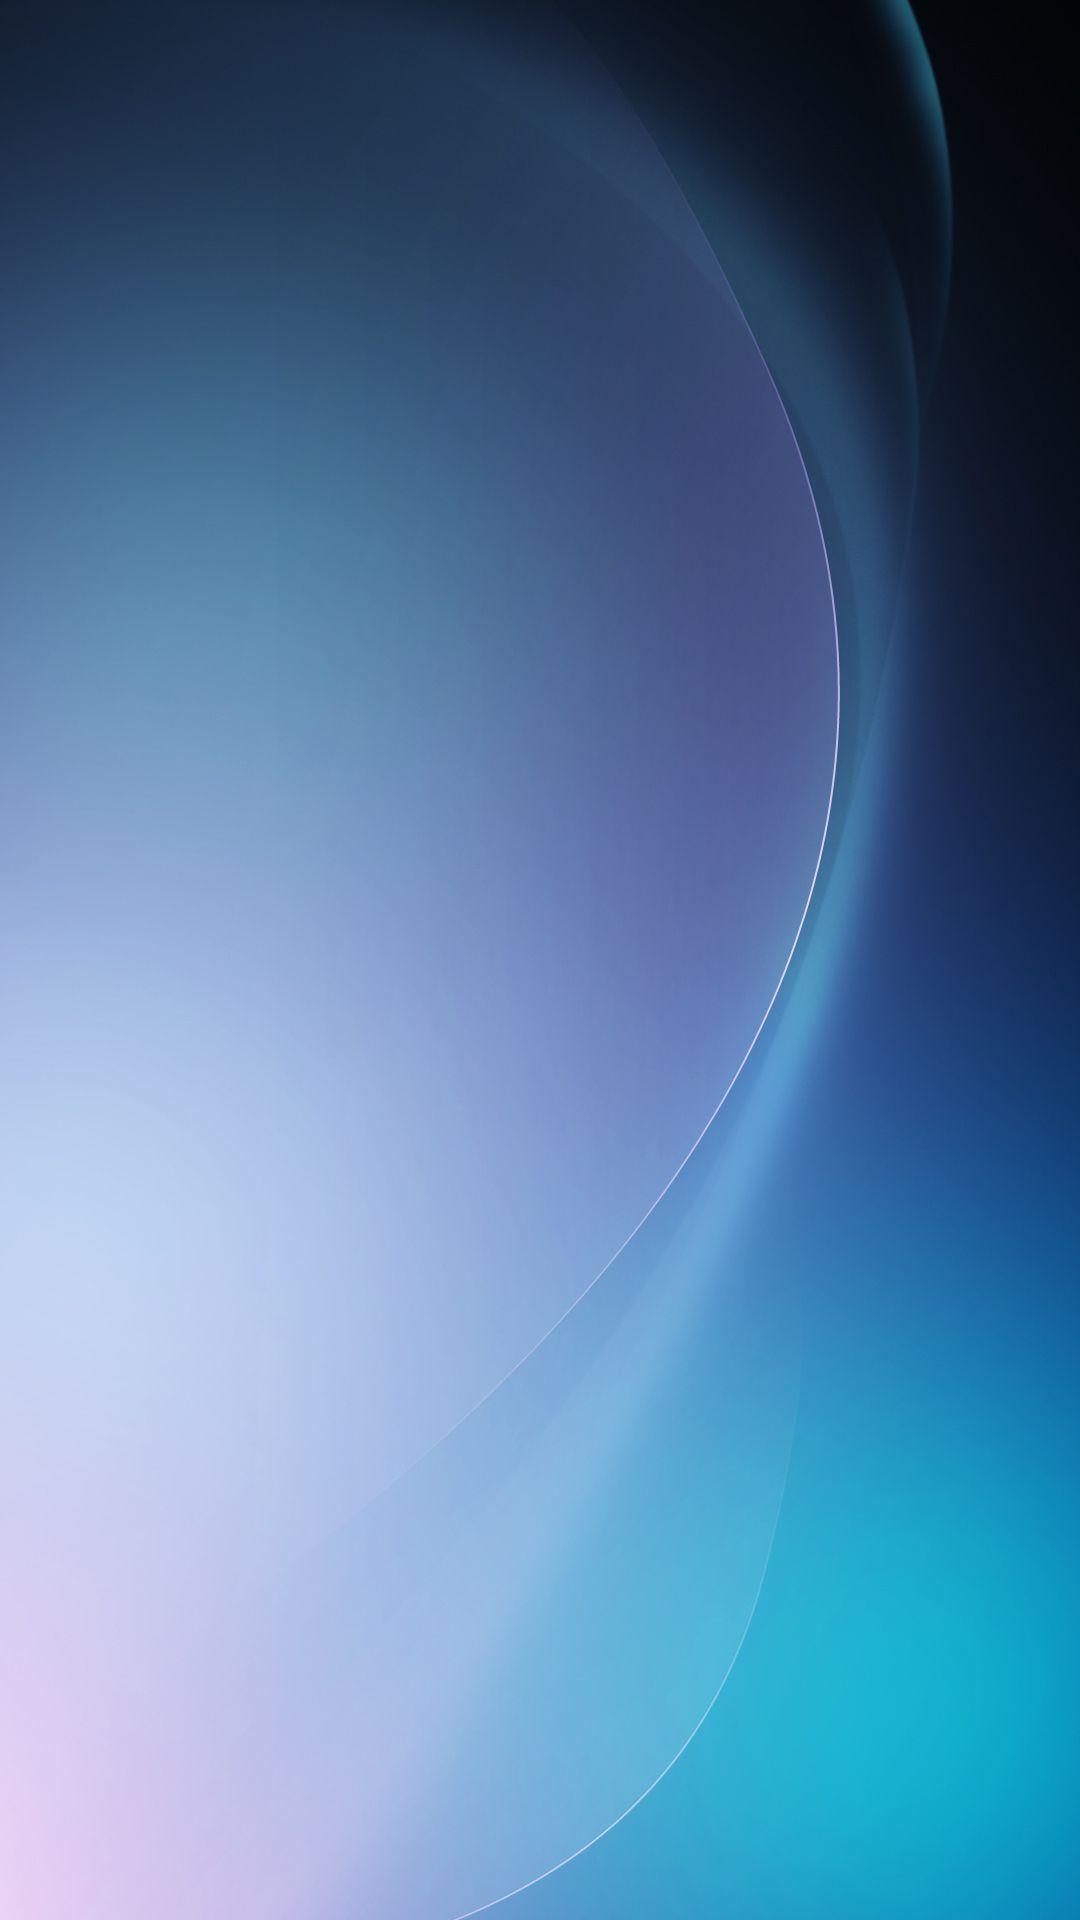 Abstract Blue Wave Android Wallpaper free download